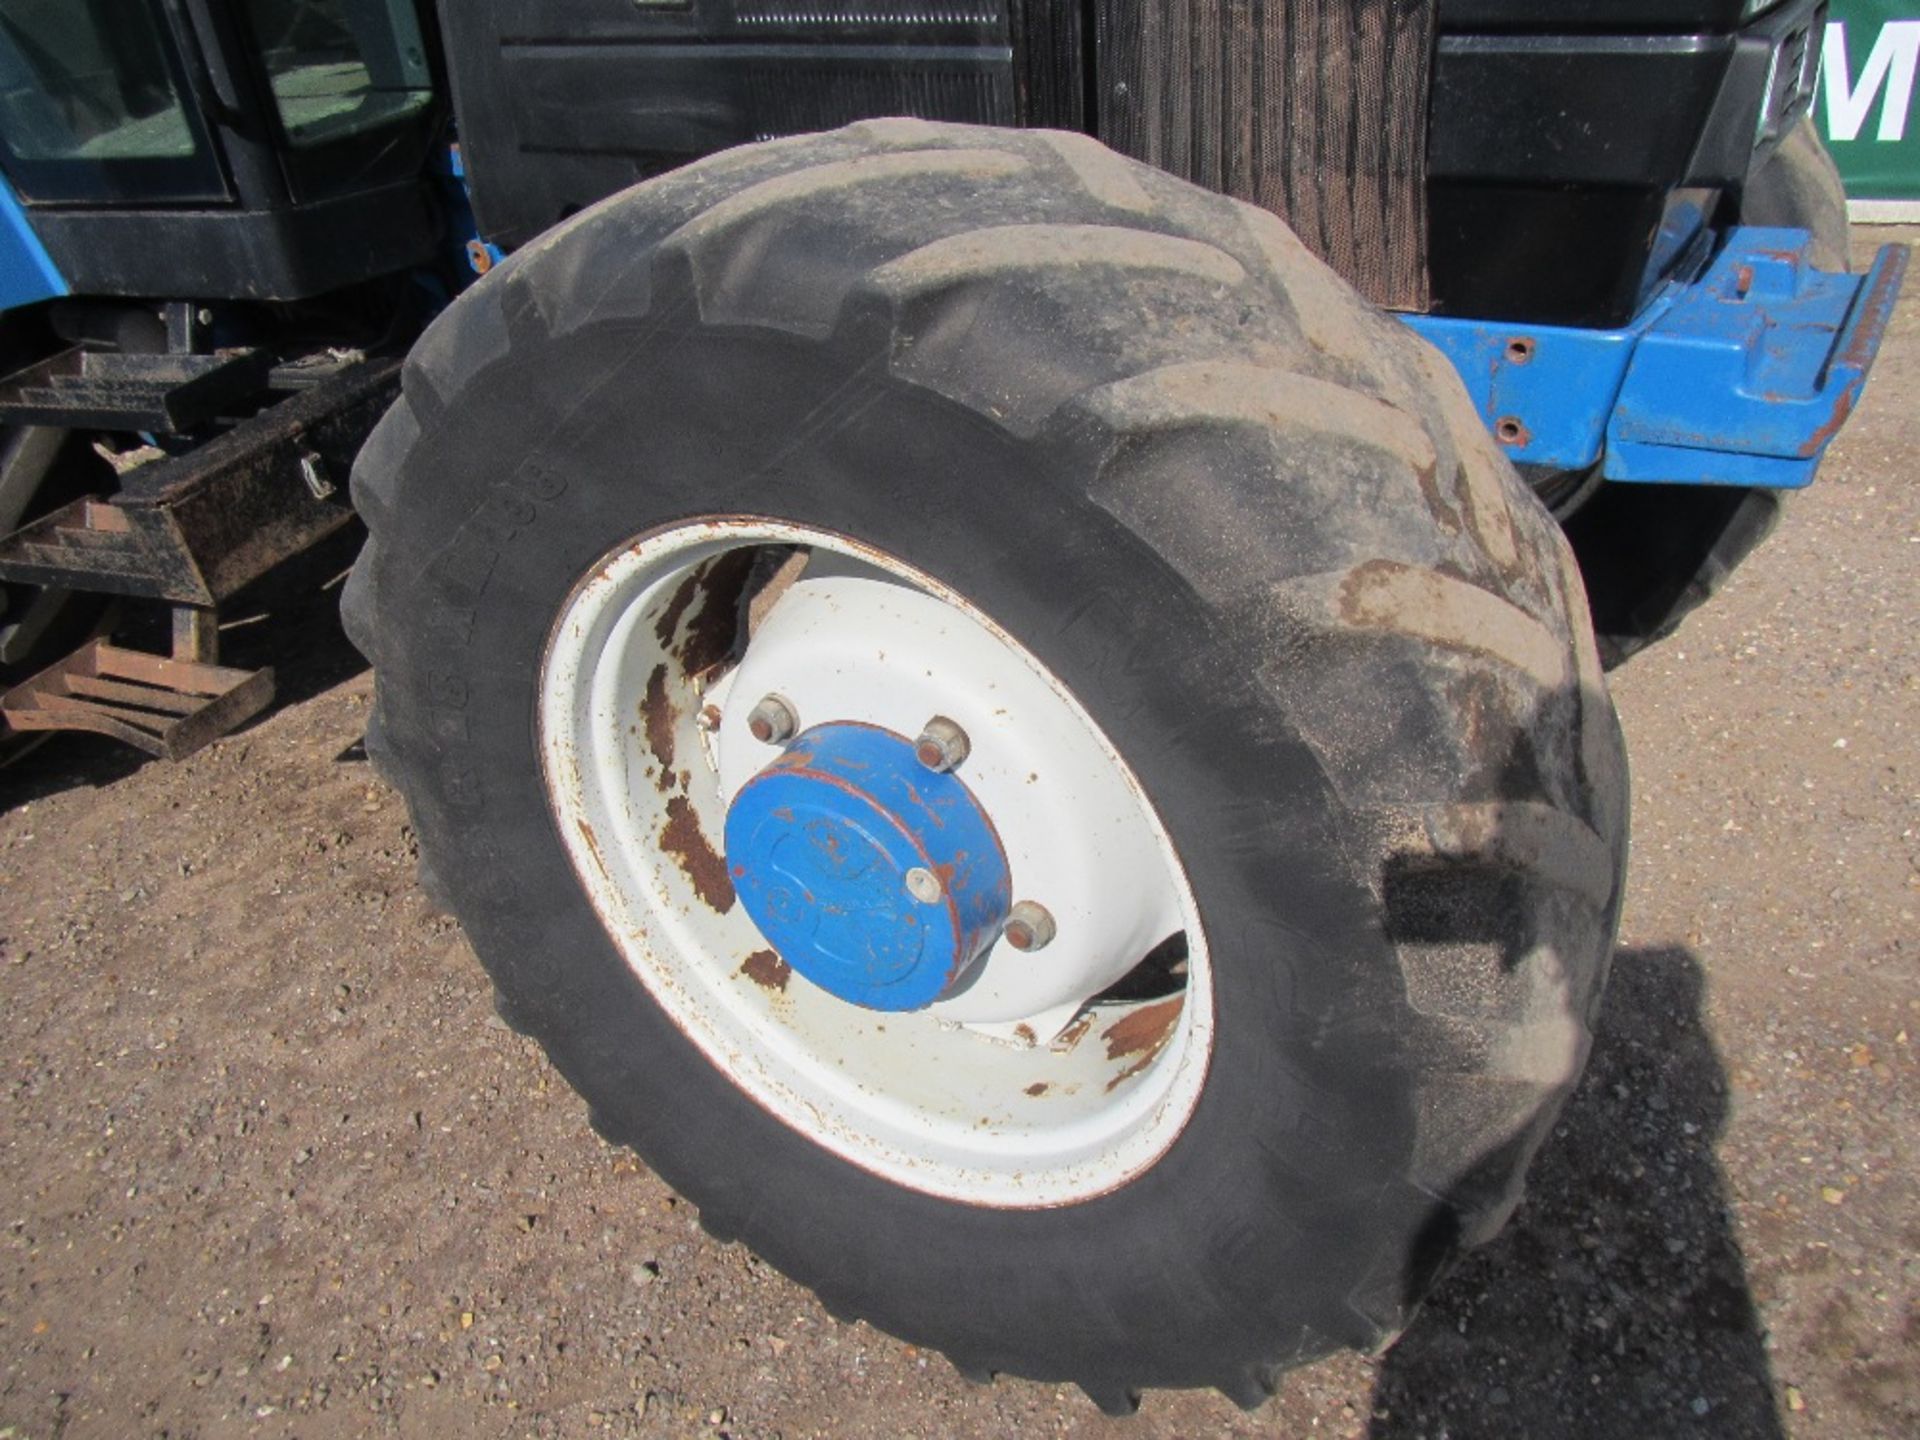 Ford New Holland 8340 SLE 40k Tractor with Air Con. Reg. No. M229 JLJ Ser No BD85370 - Image 4 of 17